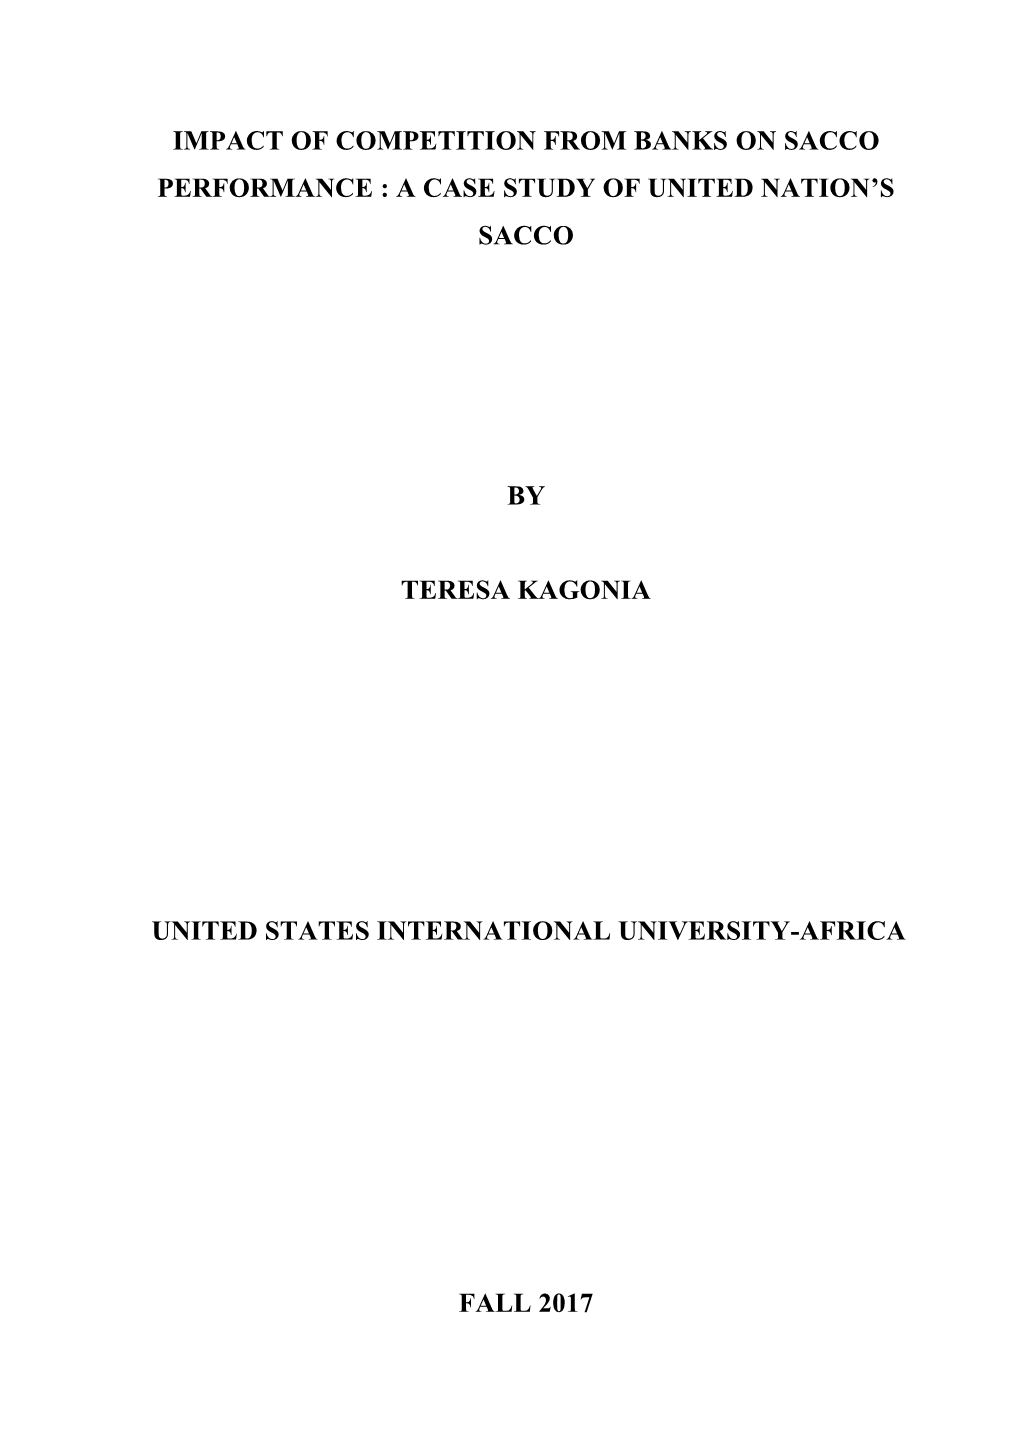 Impact of Competition from Banks on Sacco Performance : a Case Study of United Nation’S Sacco